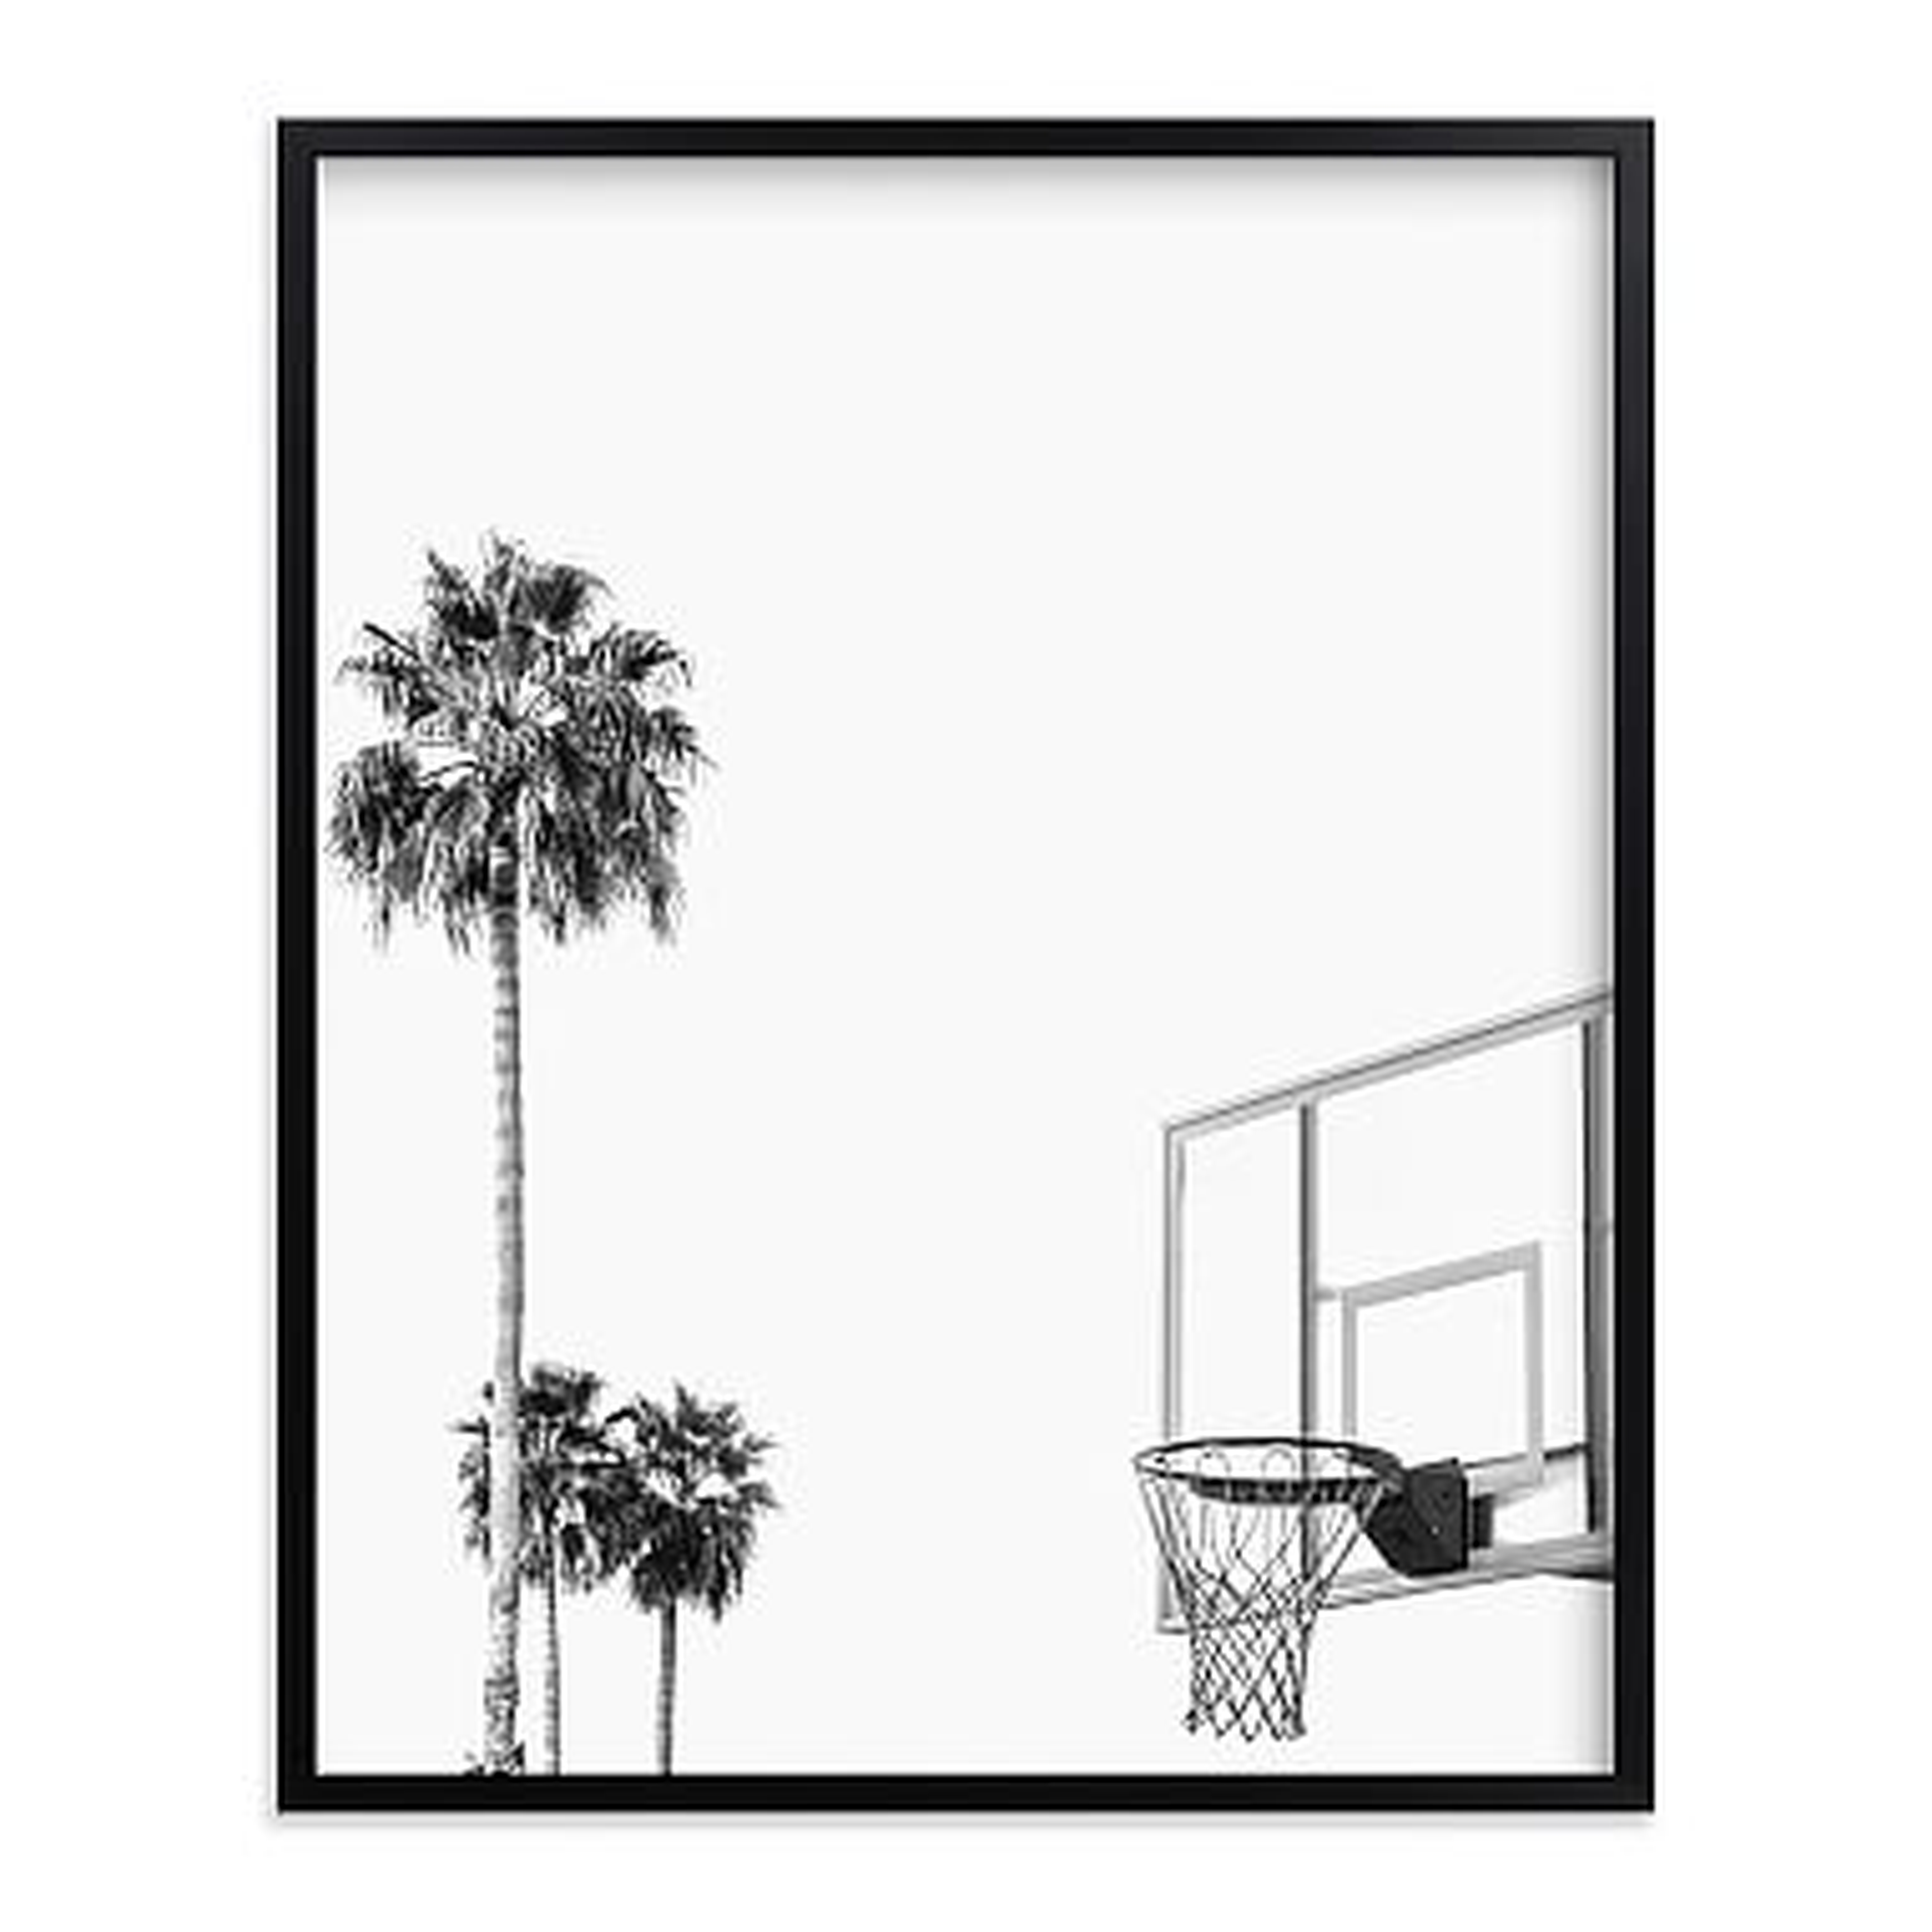 Hoops and Palms Framed Art by Minted(R), Black, 16x20 - Pottery Barn Teen